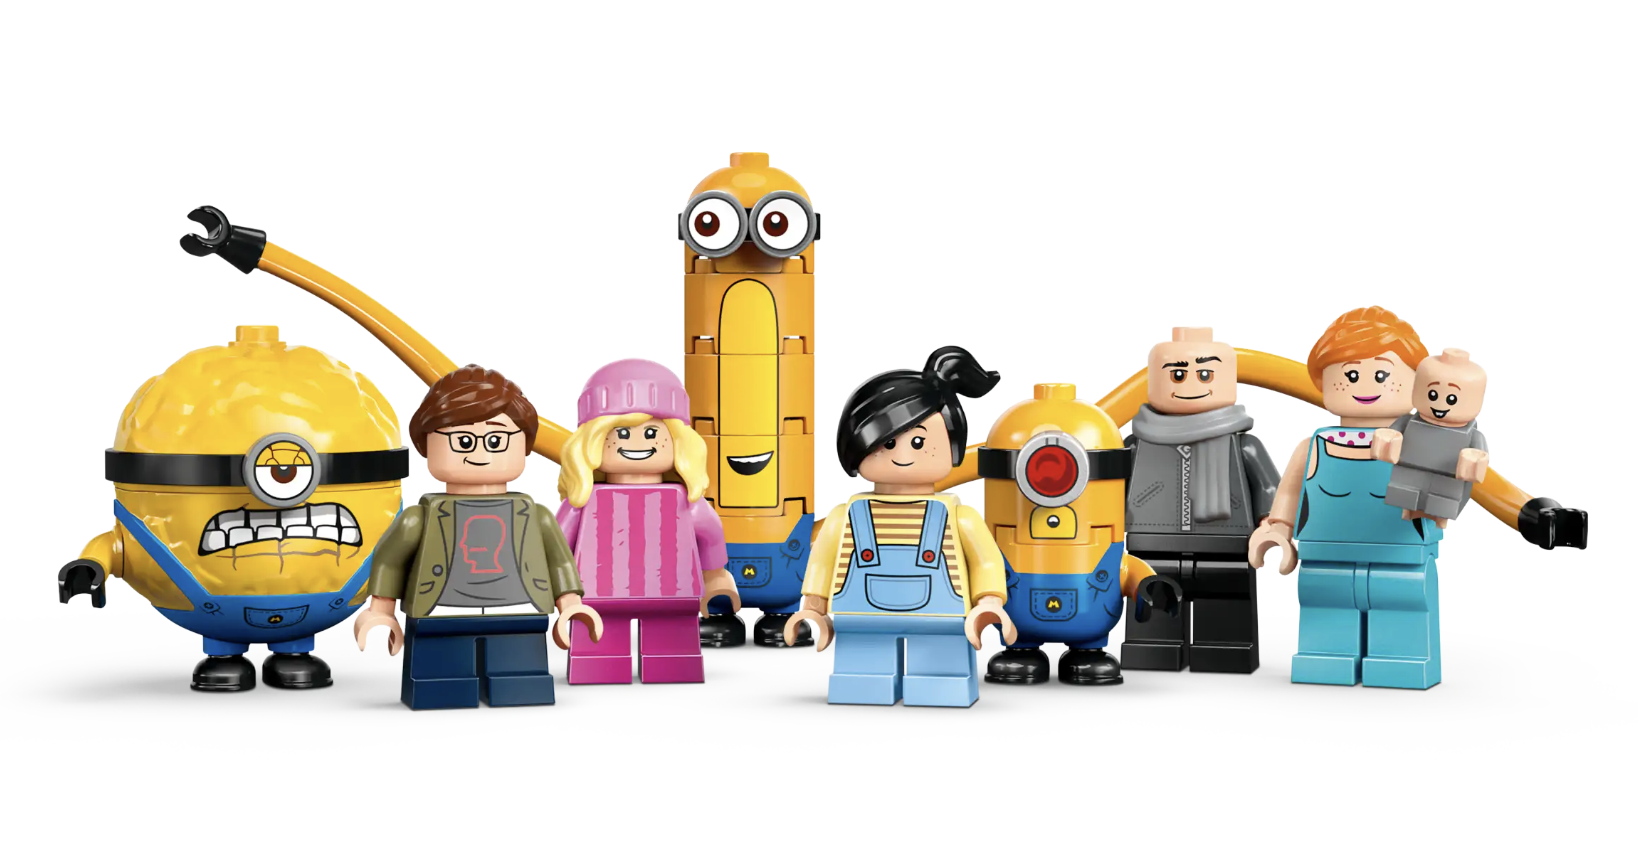 Despicable Me 4 sets are really rather Gru'd